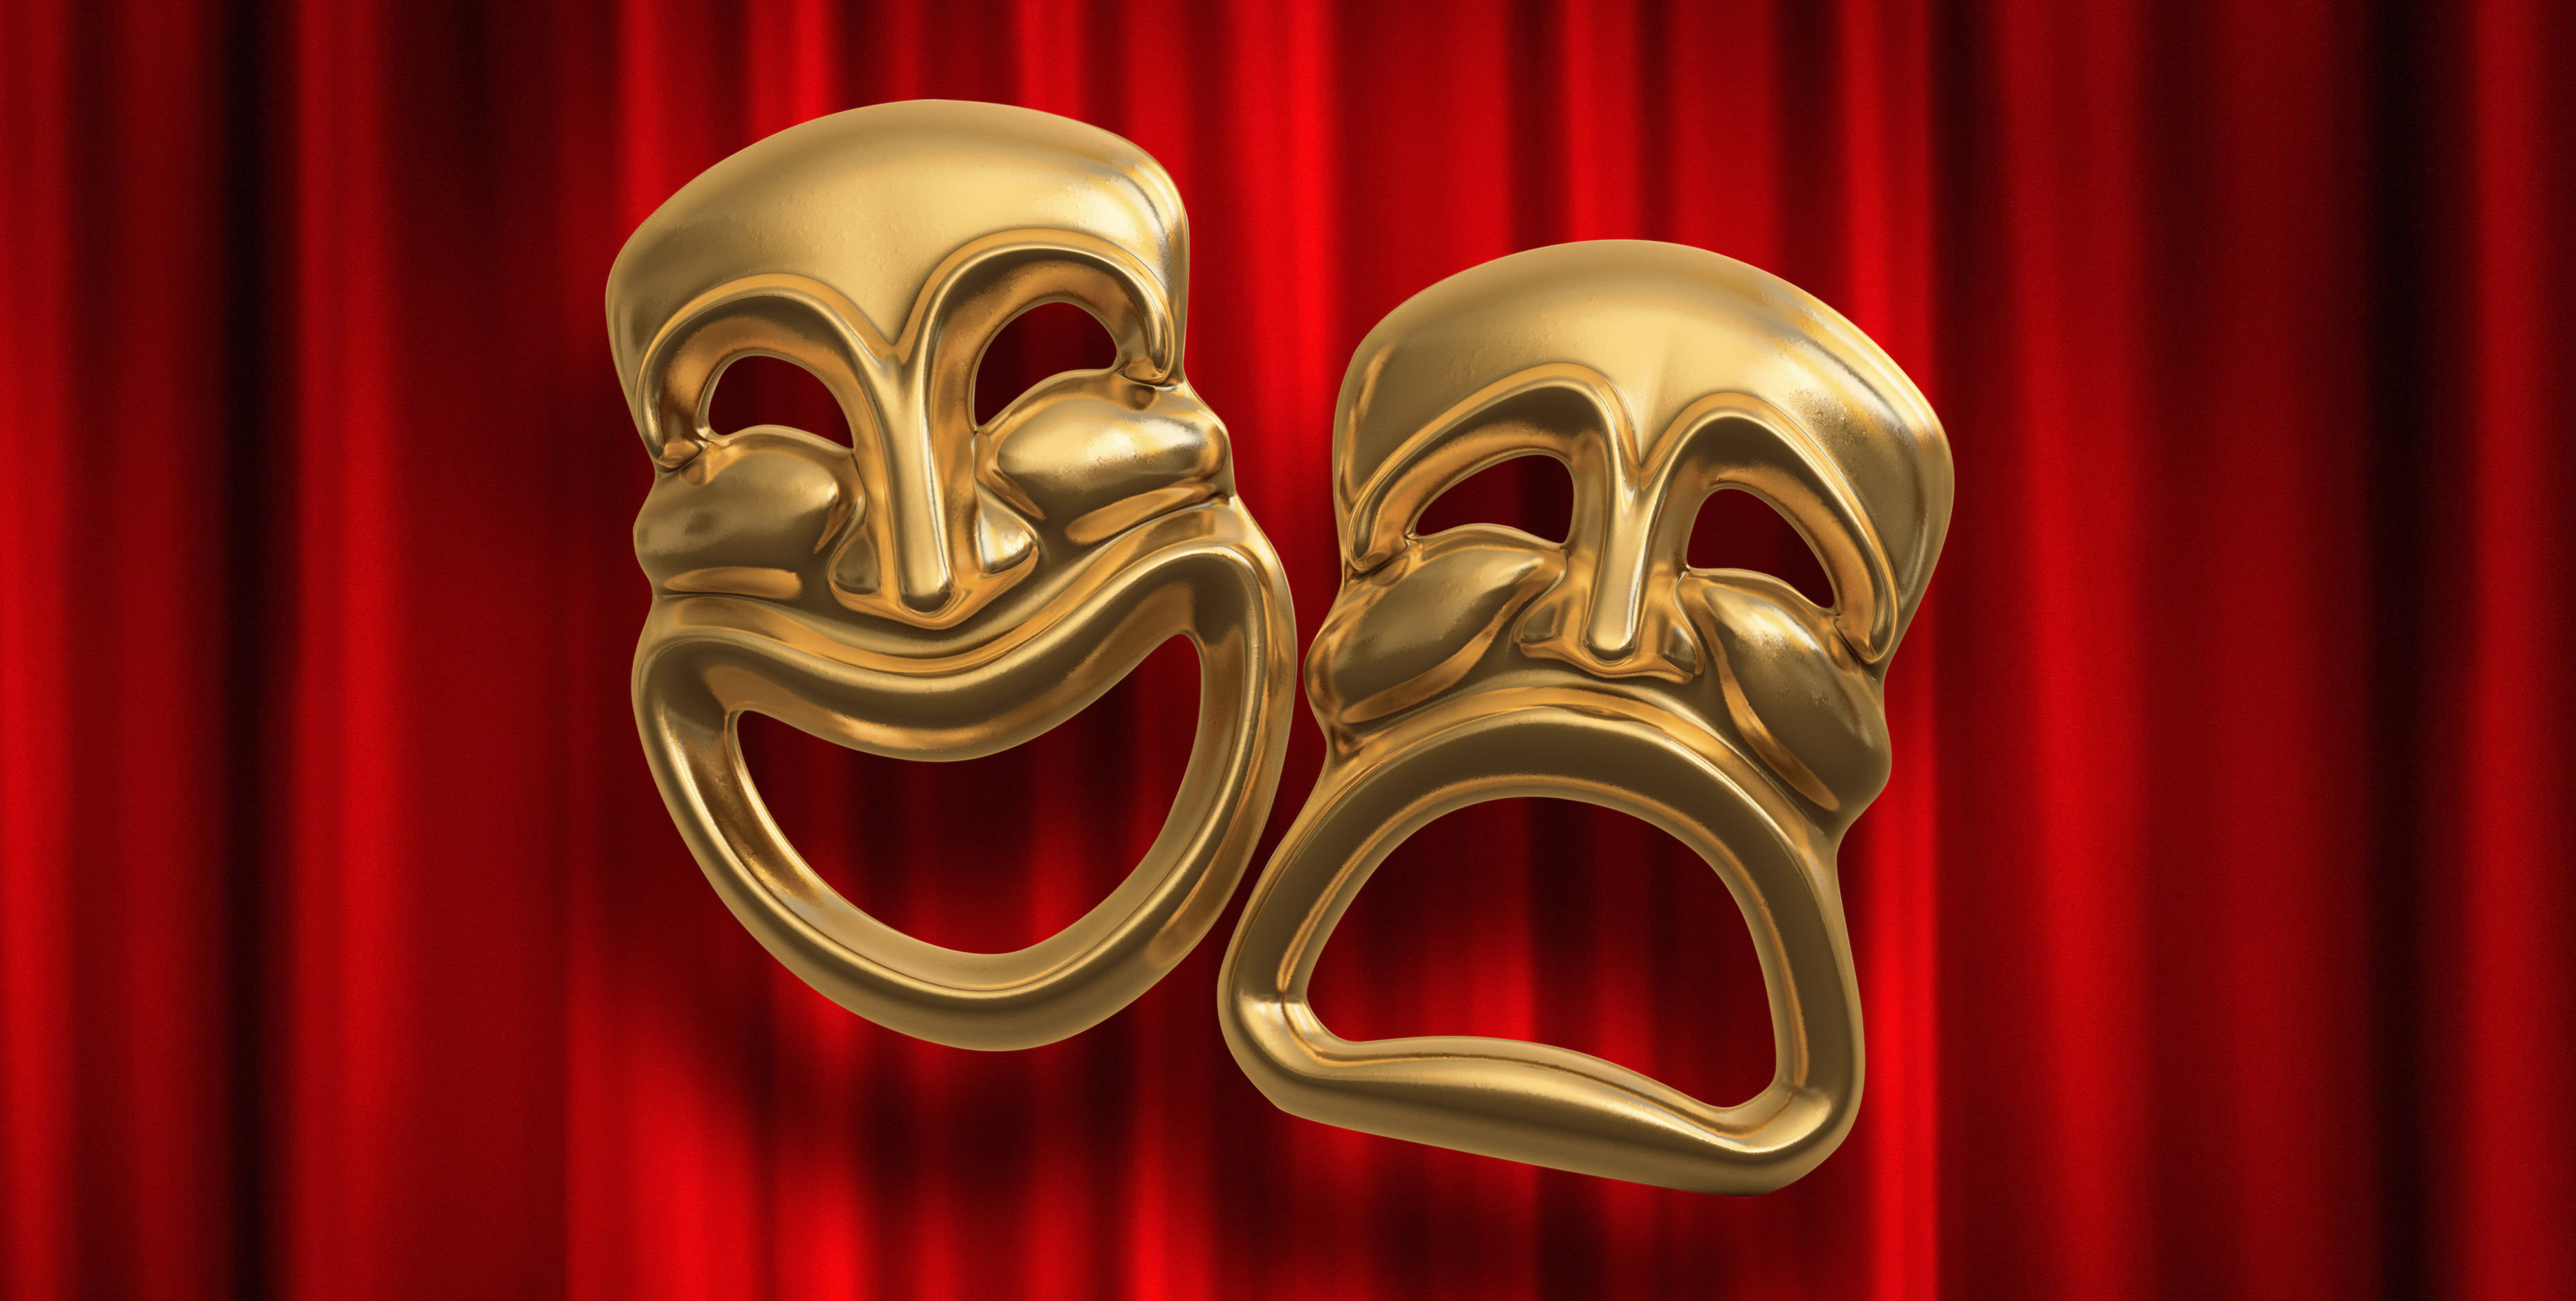 Classical comedy-tragedy theater masks against a red theatre curtain